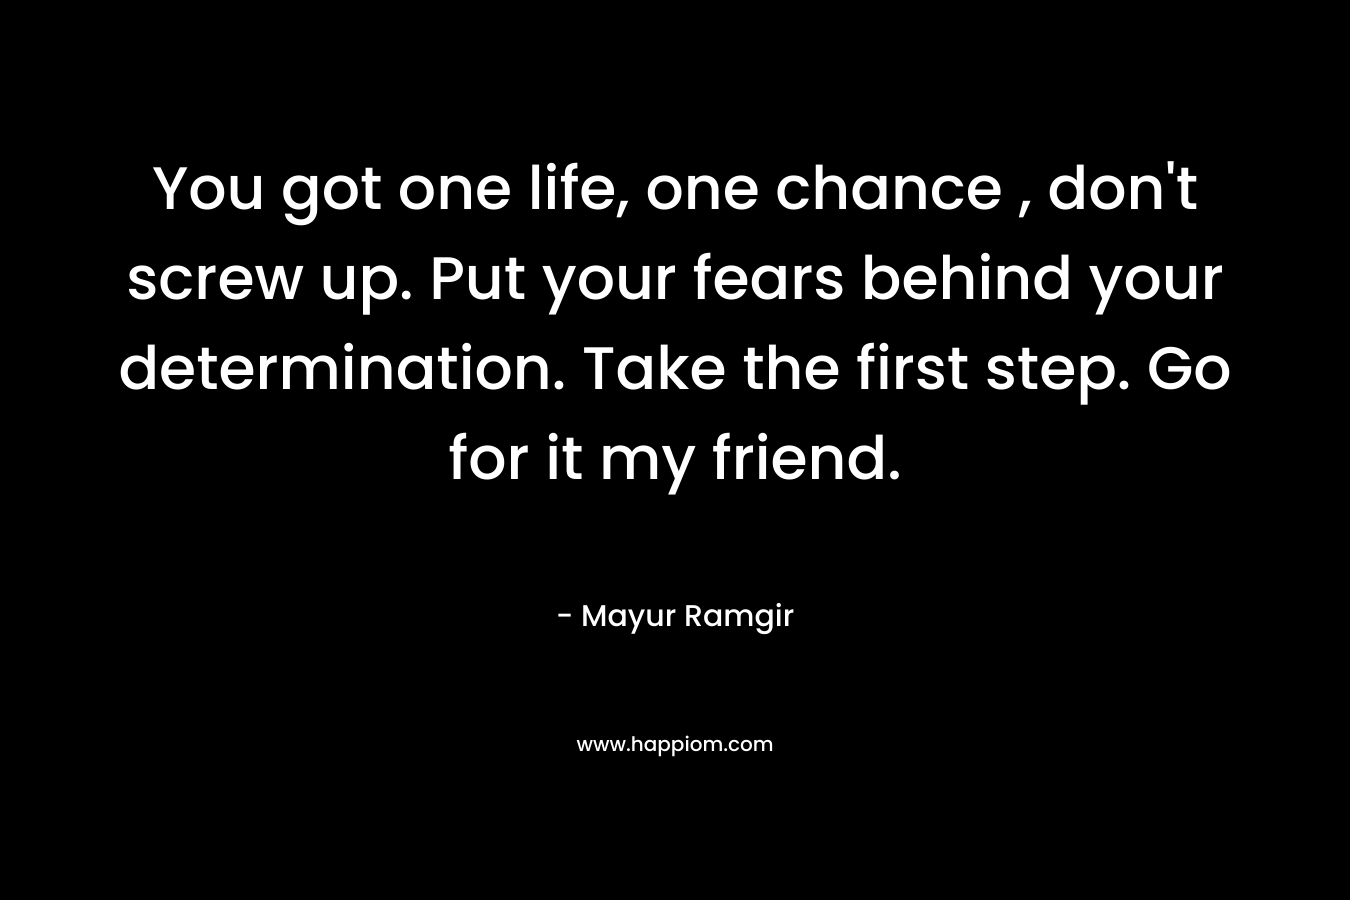 You got one life, one chance , don’t screw up. Put your fears behind your determination. Take the first step. Go for it my friend. – Mayur Ramgir